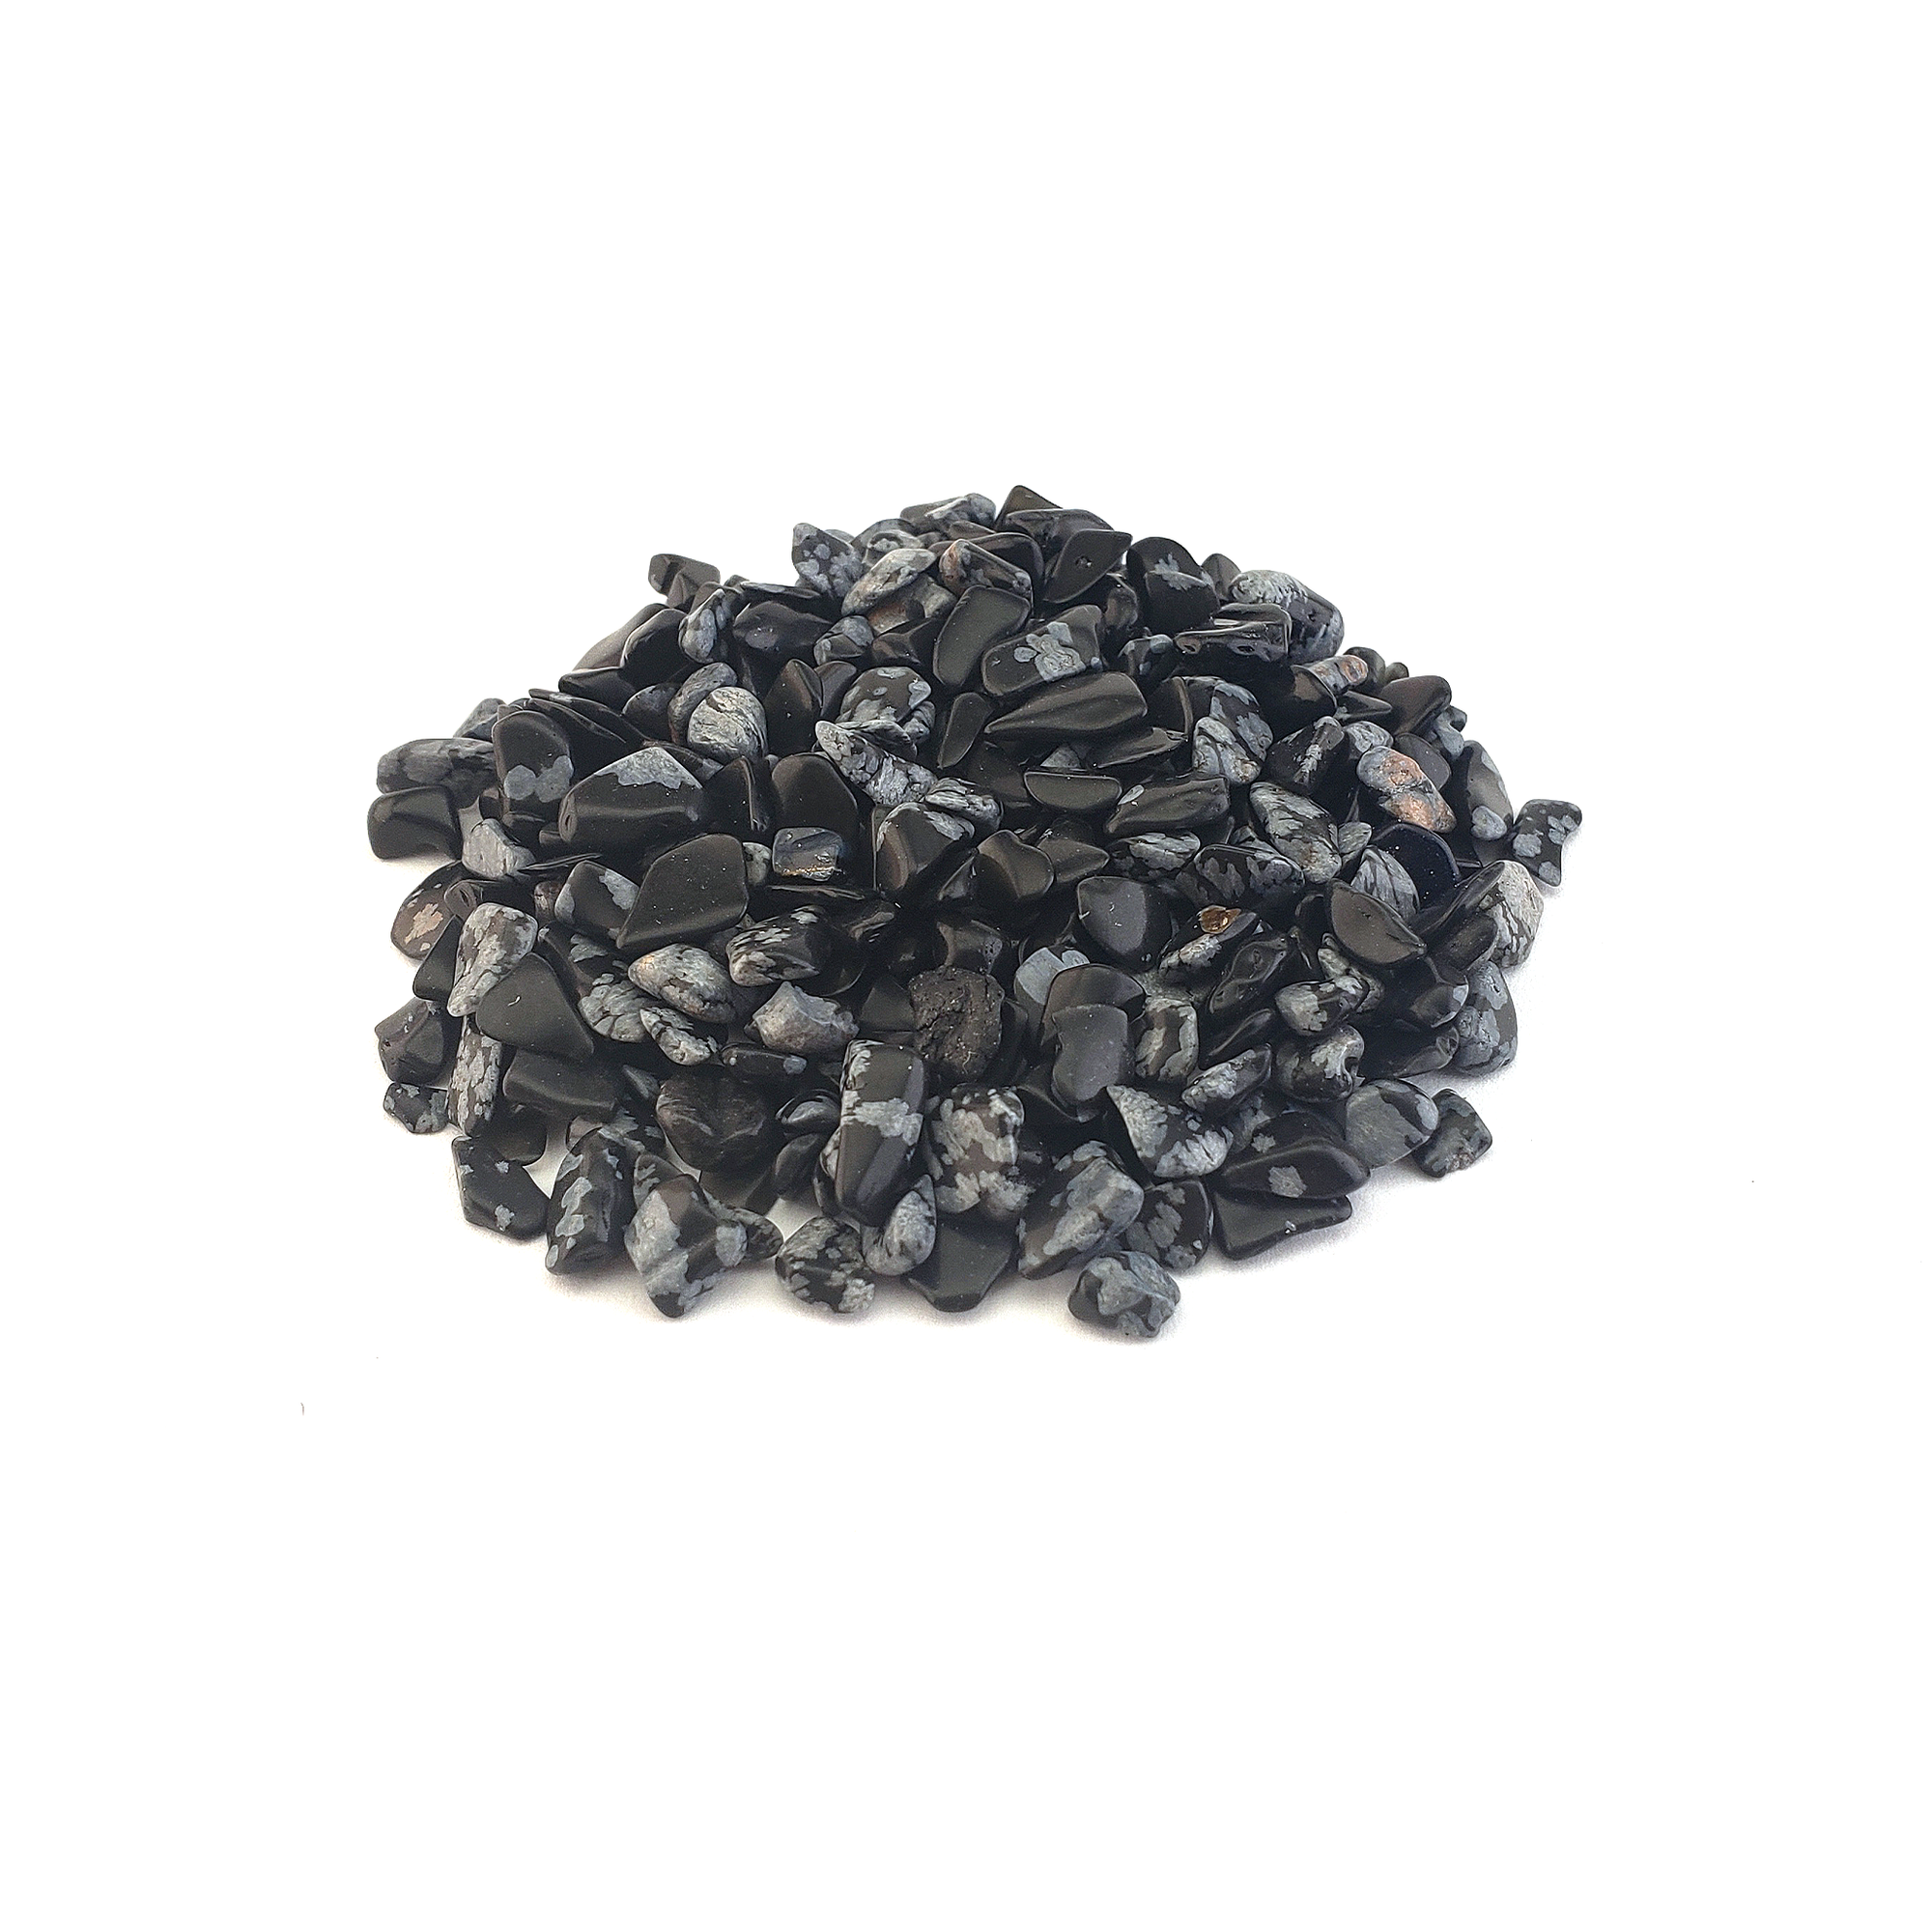 Snowflake Obsidian Natural Crystal Chips by the Ounce